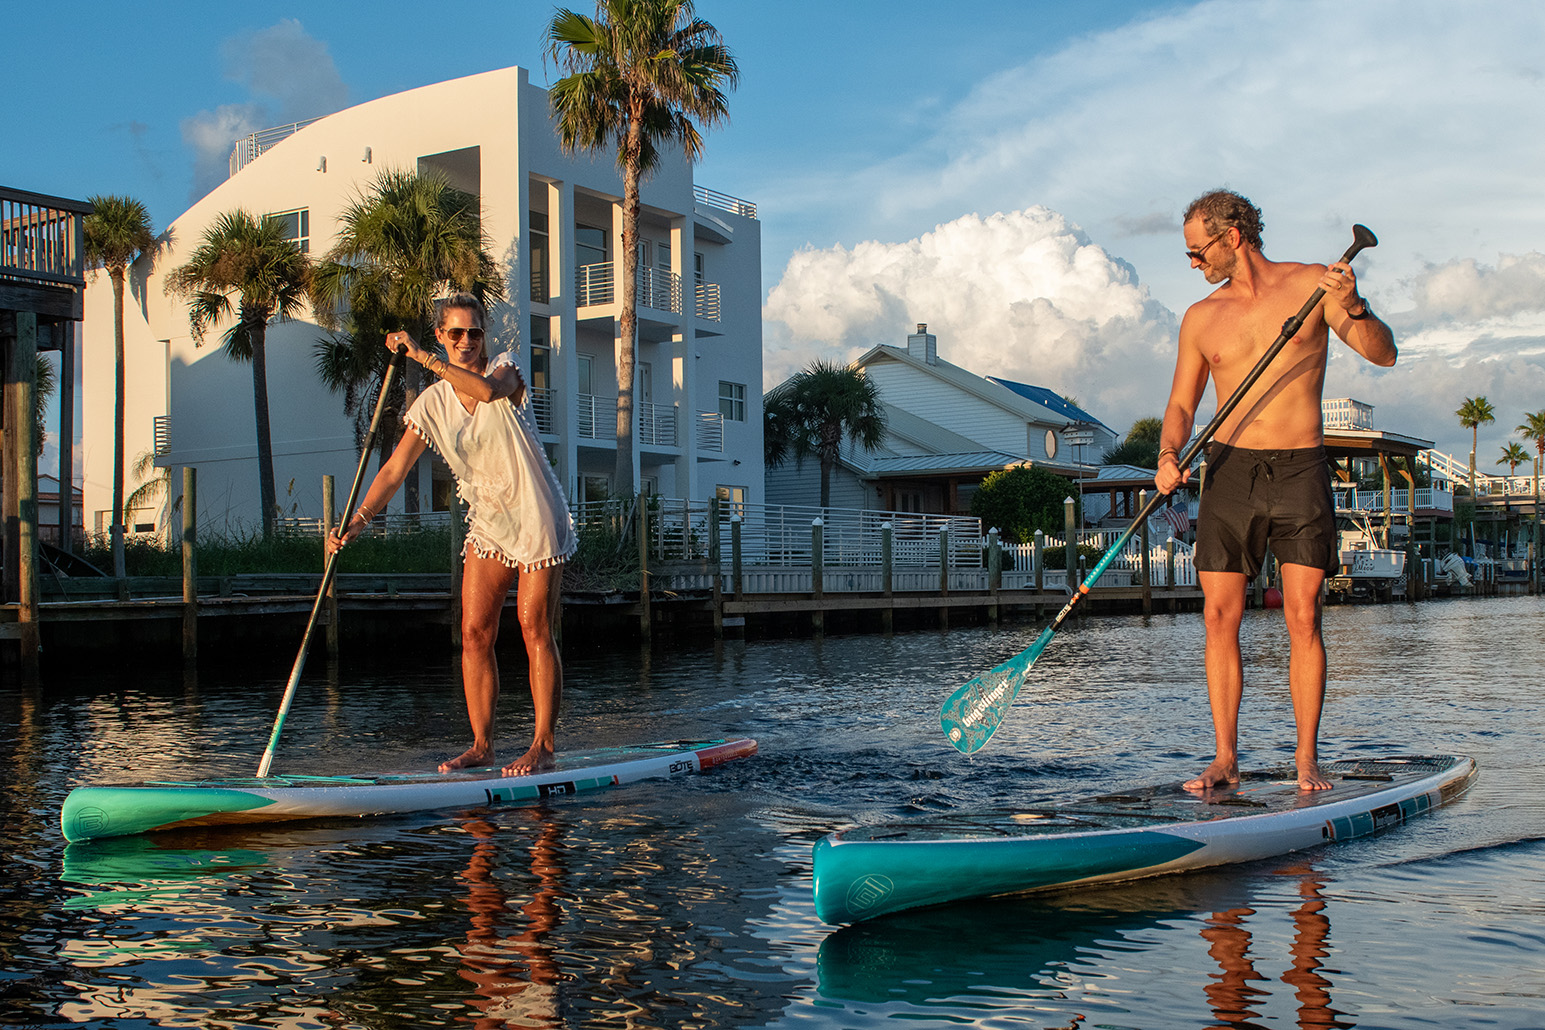 Corey and Magda Cooper standing on BOTE boards in the water as the sun sets.